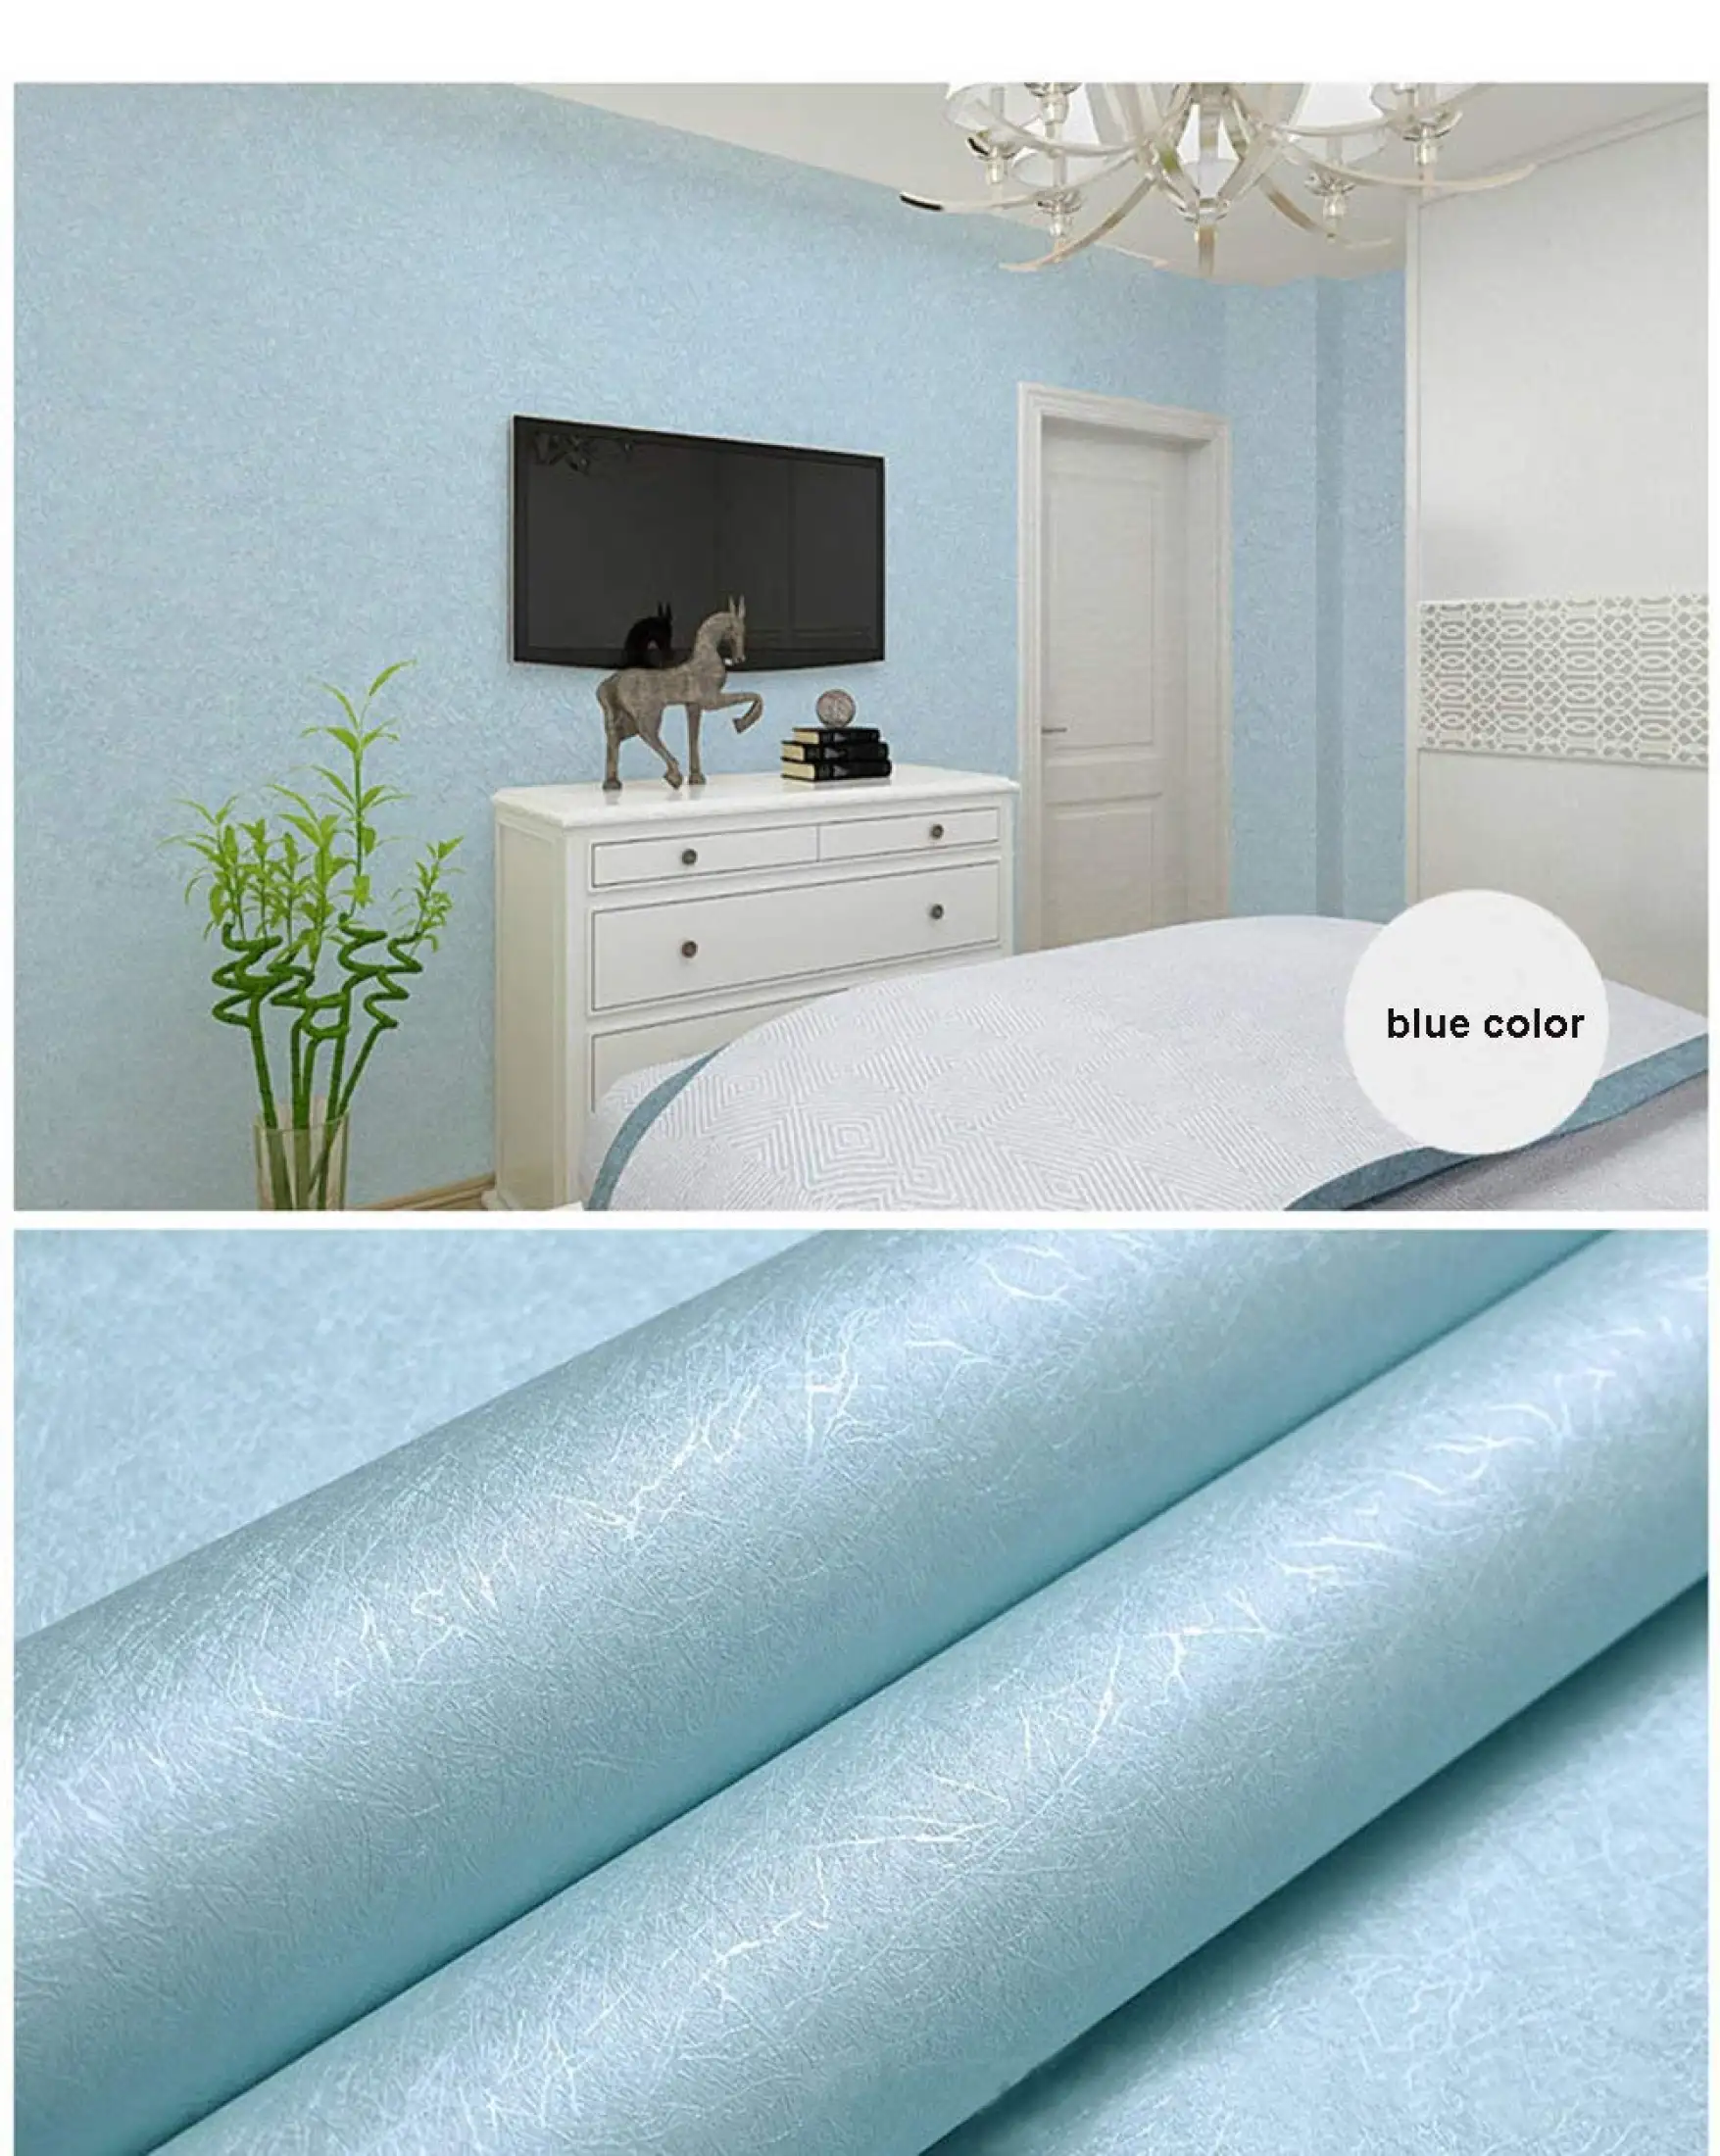 Light Blue Wallpaper Self Adhesive Wallpaper Waterproof Pvc With Glue Plain Wall Stickers Solid Color Renovation Background Sticker For Home Bedroom Living Room Pastel Blue Color Kmjshop Lazada Ph